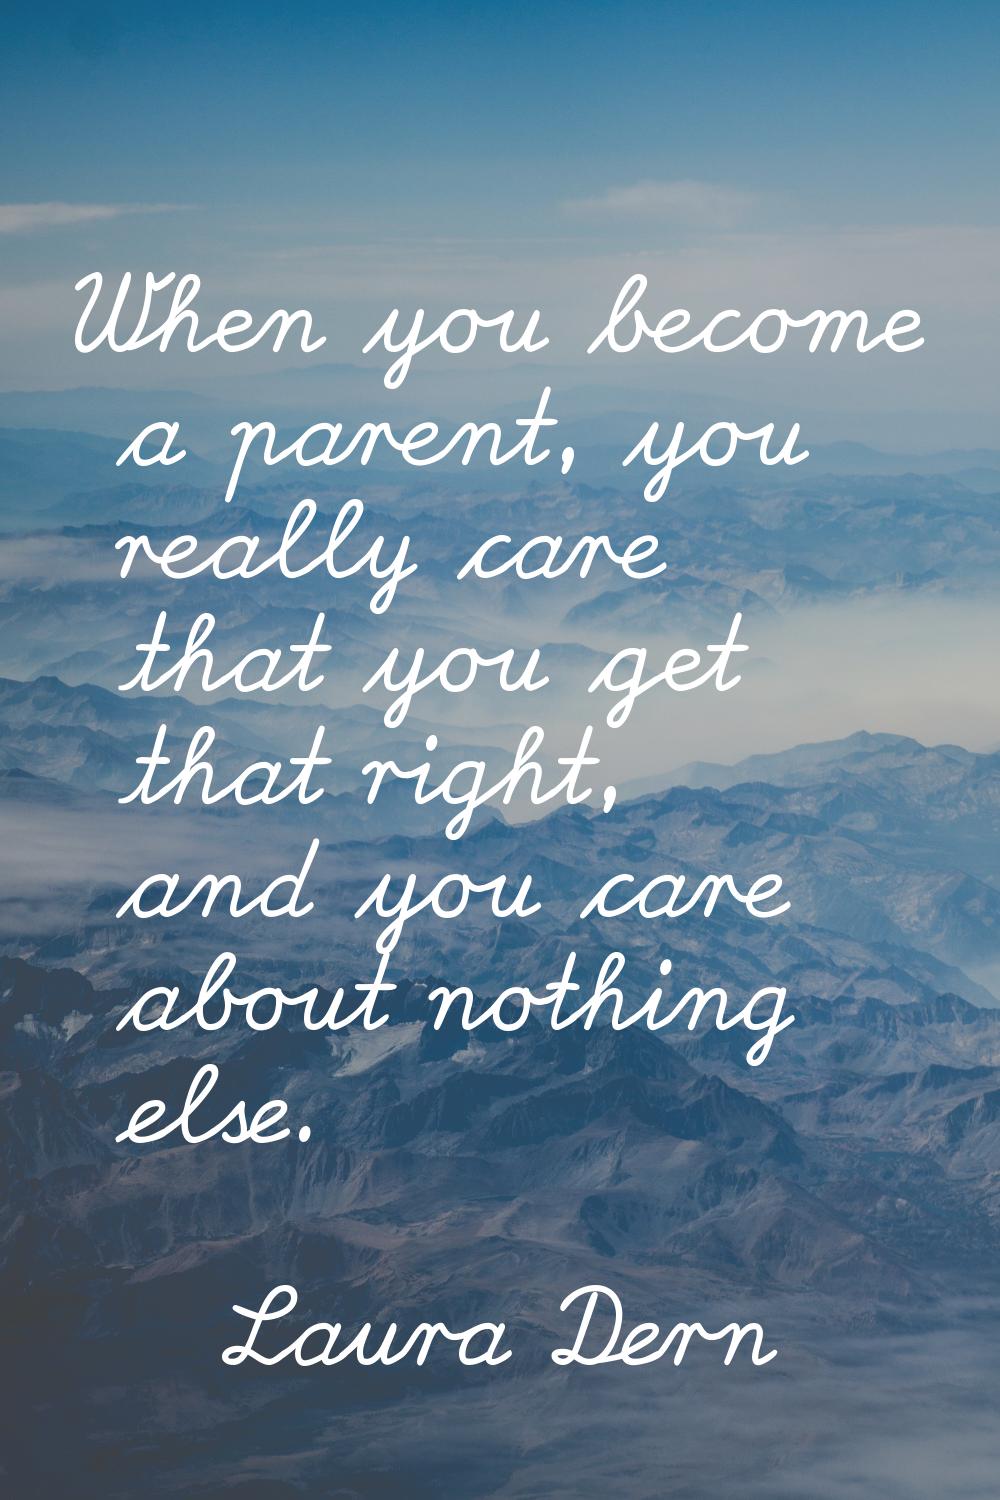 When you become a parent, you really care that you get that right, and you care about nothing else.